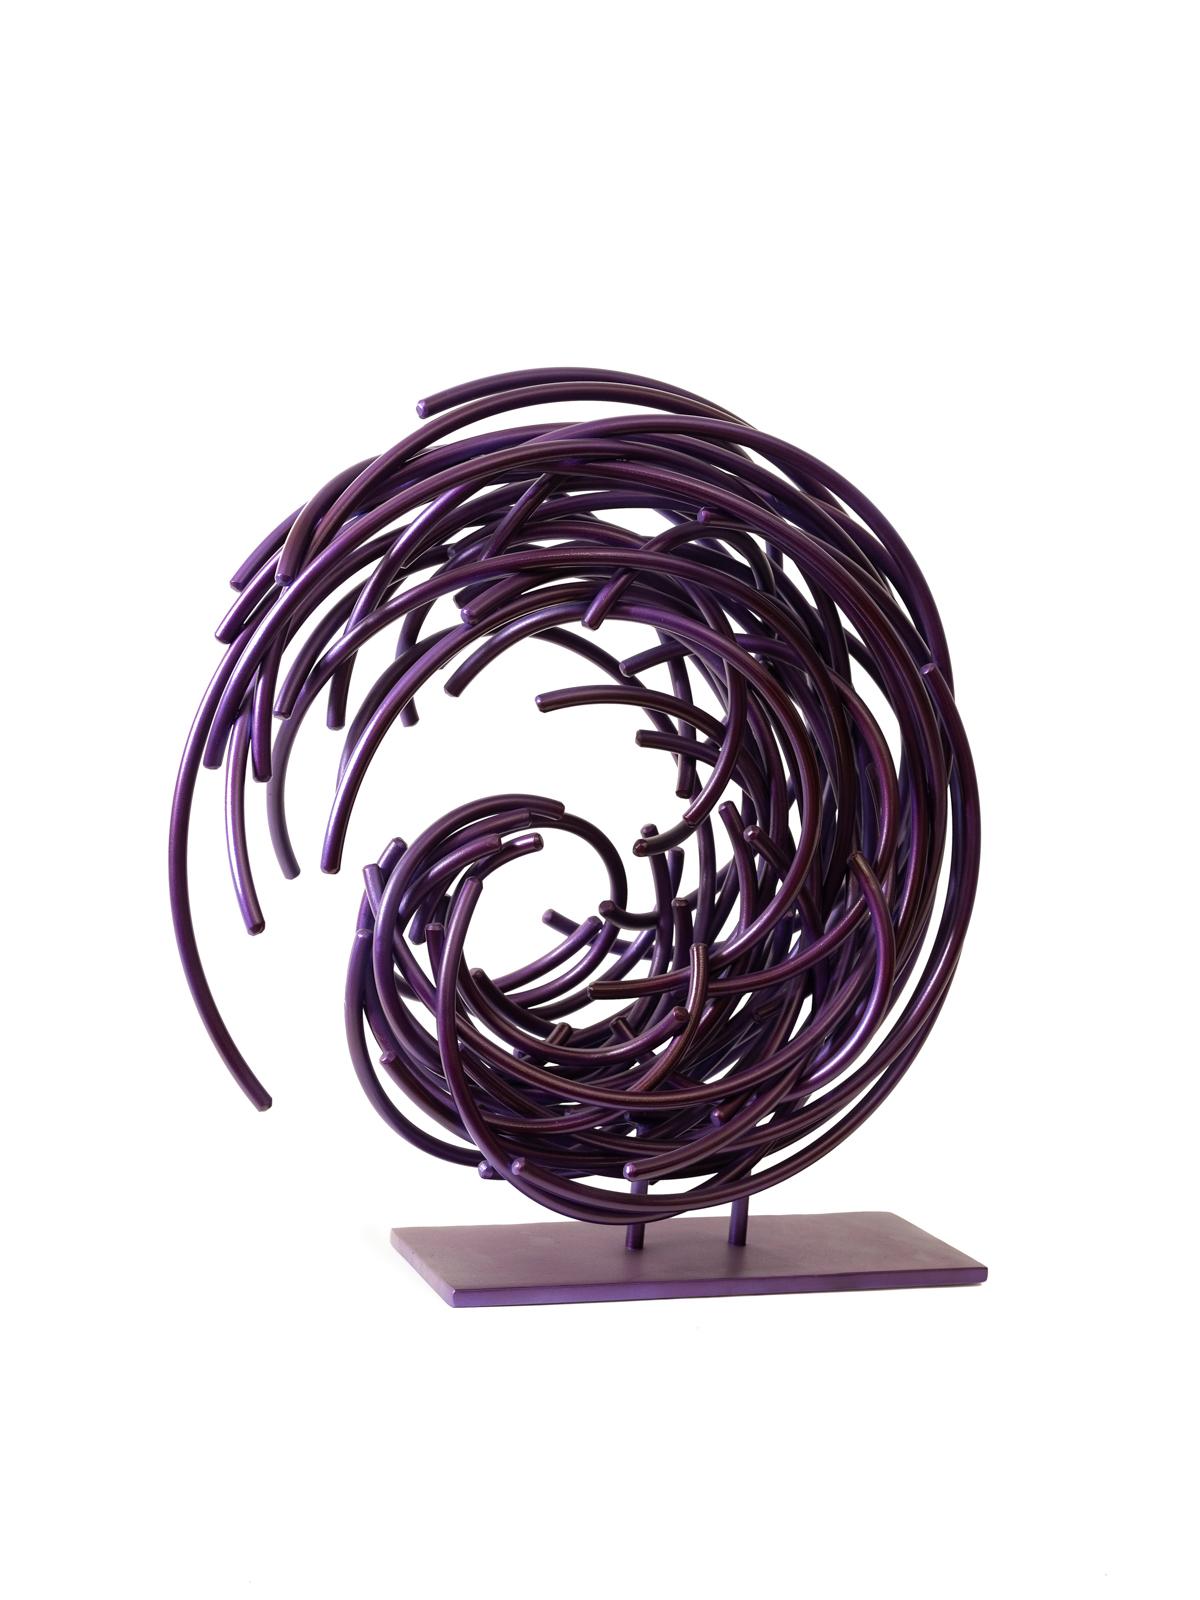 Maelstrom Series No 5 - layered, intersecting, forged aluminum sculpture For Sale 2